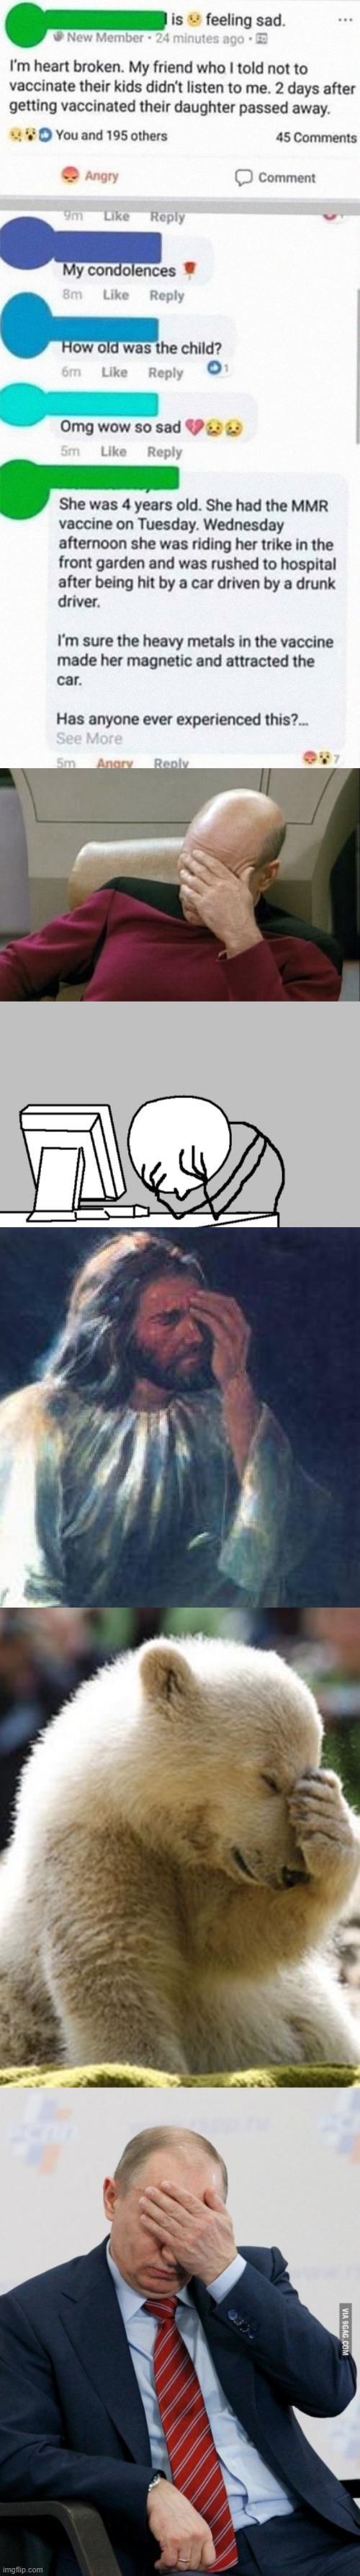 How dumb do you have to be?! | image tagged in memes,captain picard facepalm,computer guy facepalm,jesus facepalm,facepalm bear,putin facepalm | made w/ Imgflip meme maker